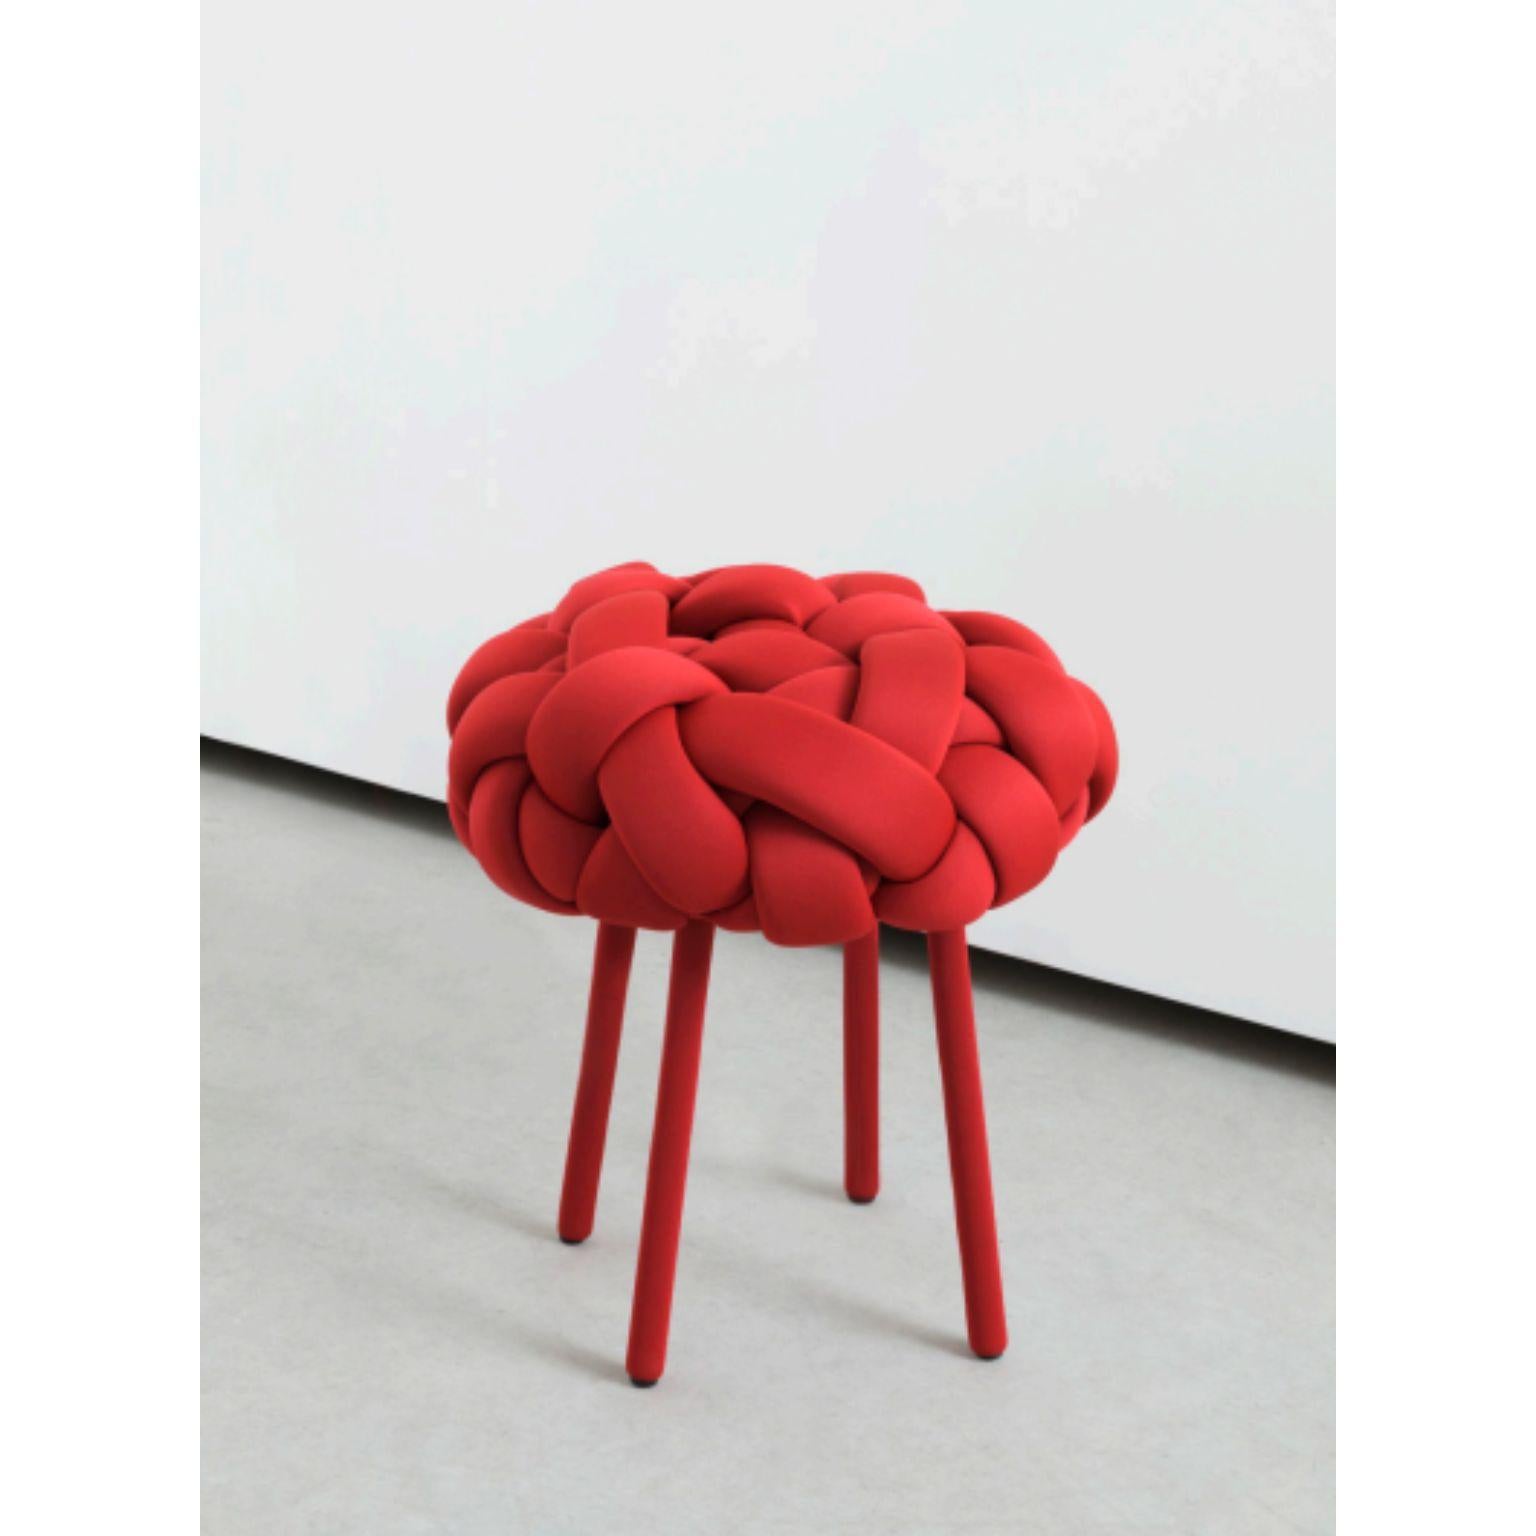 Neocloud stool by Humberto da Mata.
Dimensions: L 45 x W 45 x H 48 cm.
Materials: Metallic structure, foam, plywood and neoprene.
Also available in other colors.

Humberto da mata is a design studio located in São Paulo, Brazil.
Focused on